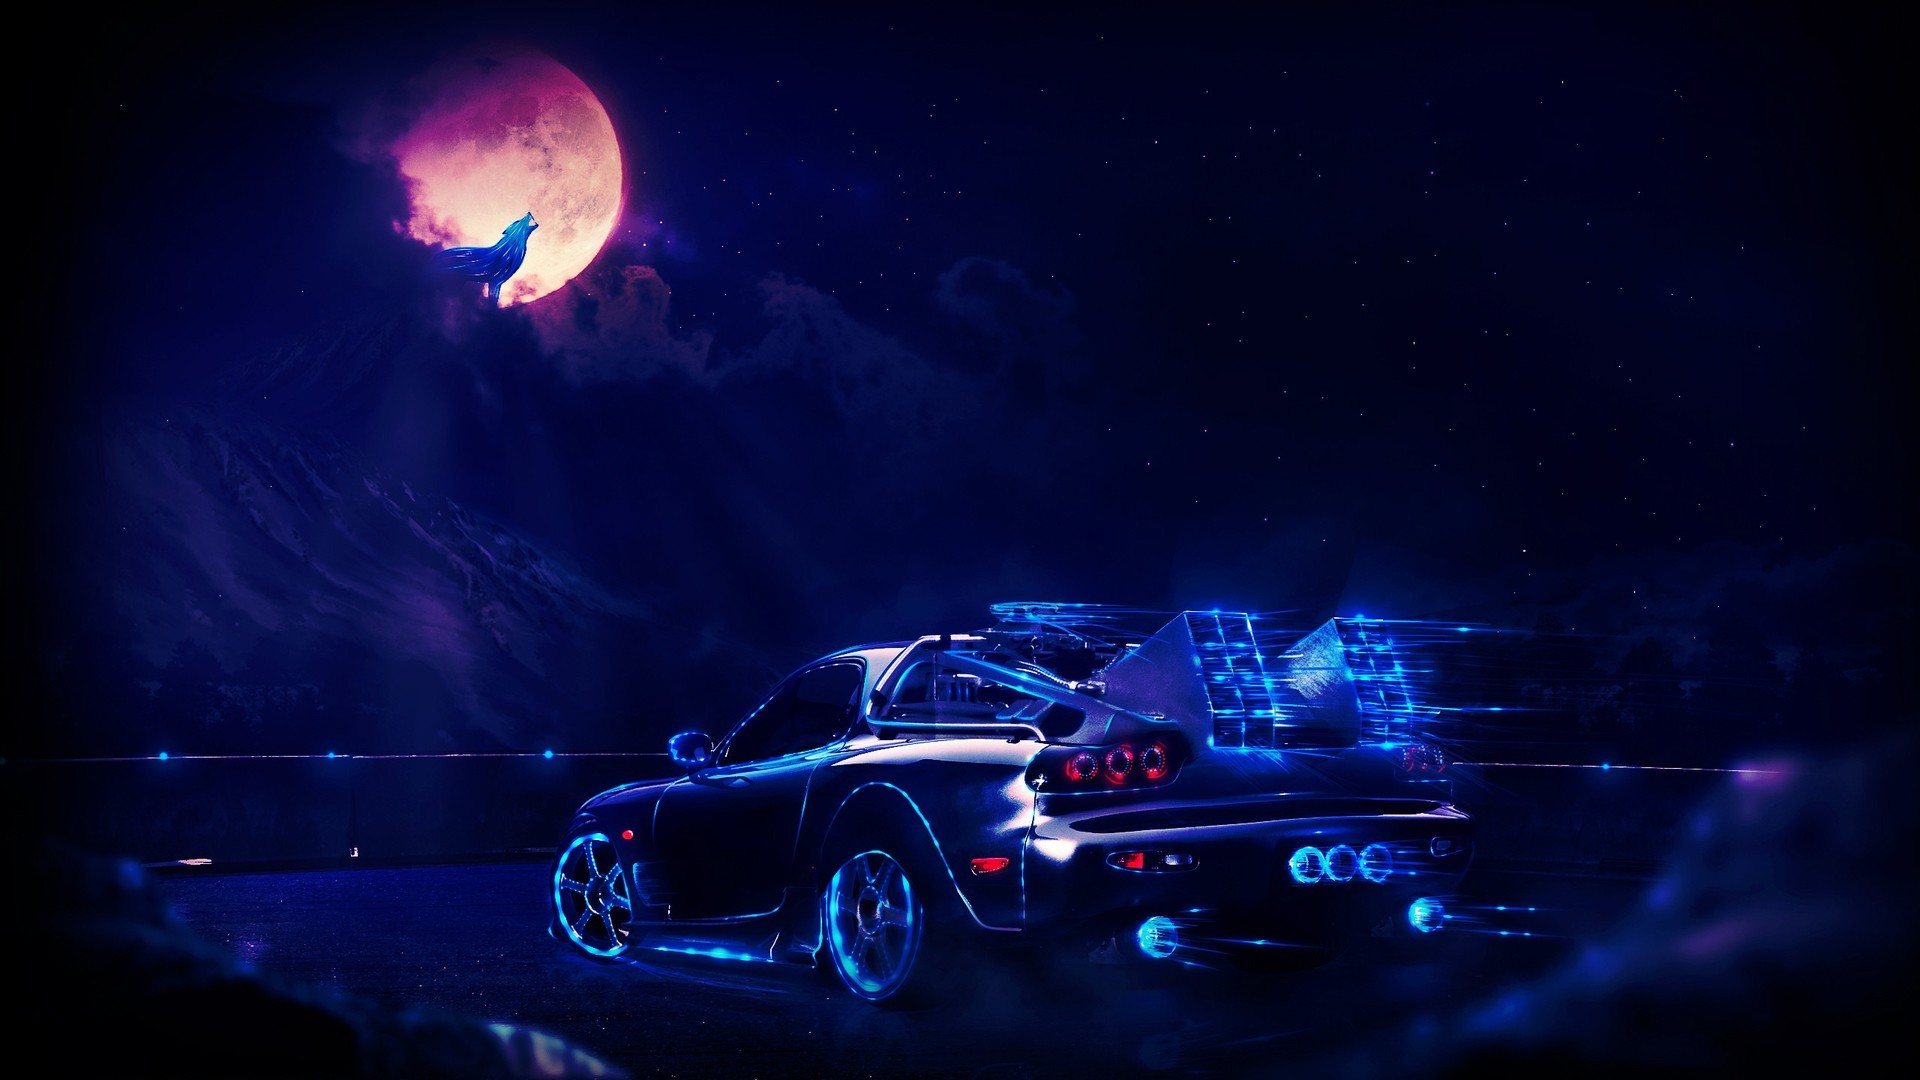 General 1920x1080 car neon Moon wolf Back to the Future digital art vehicle blue Time Machine time travel sky dark